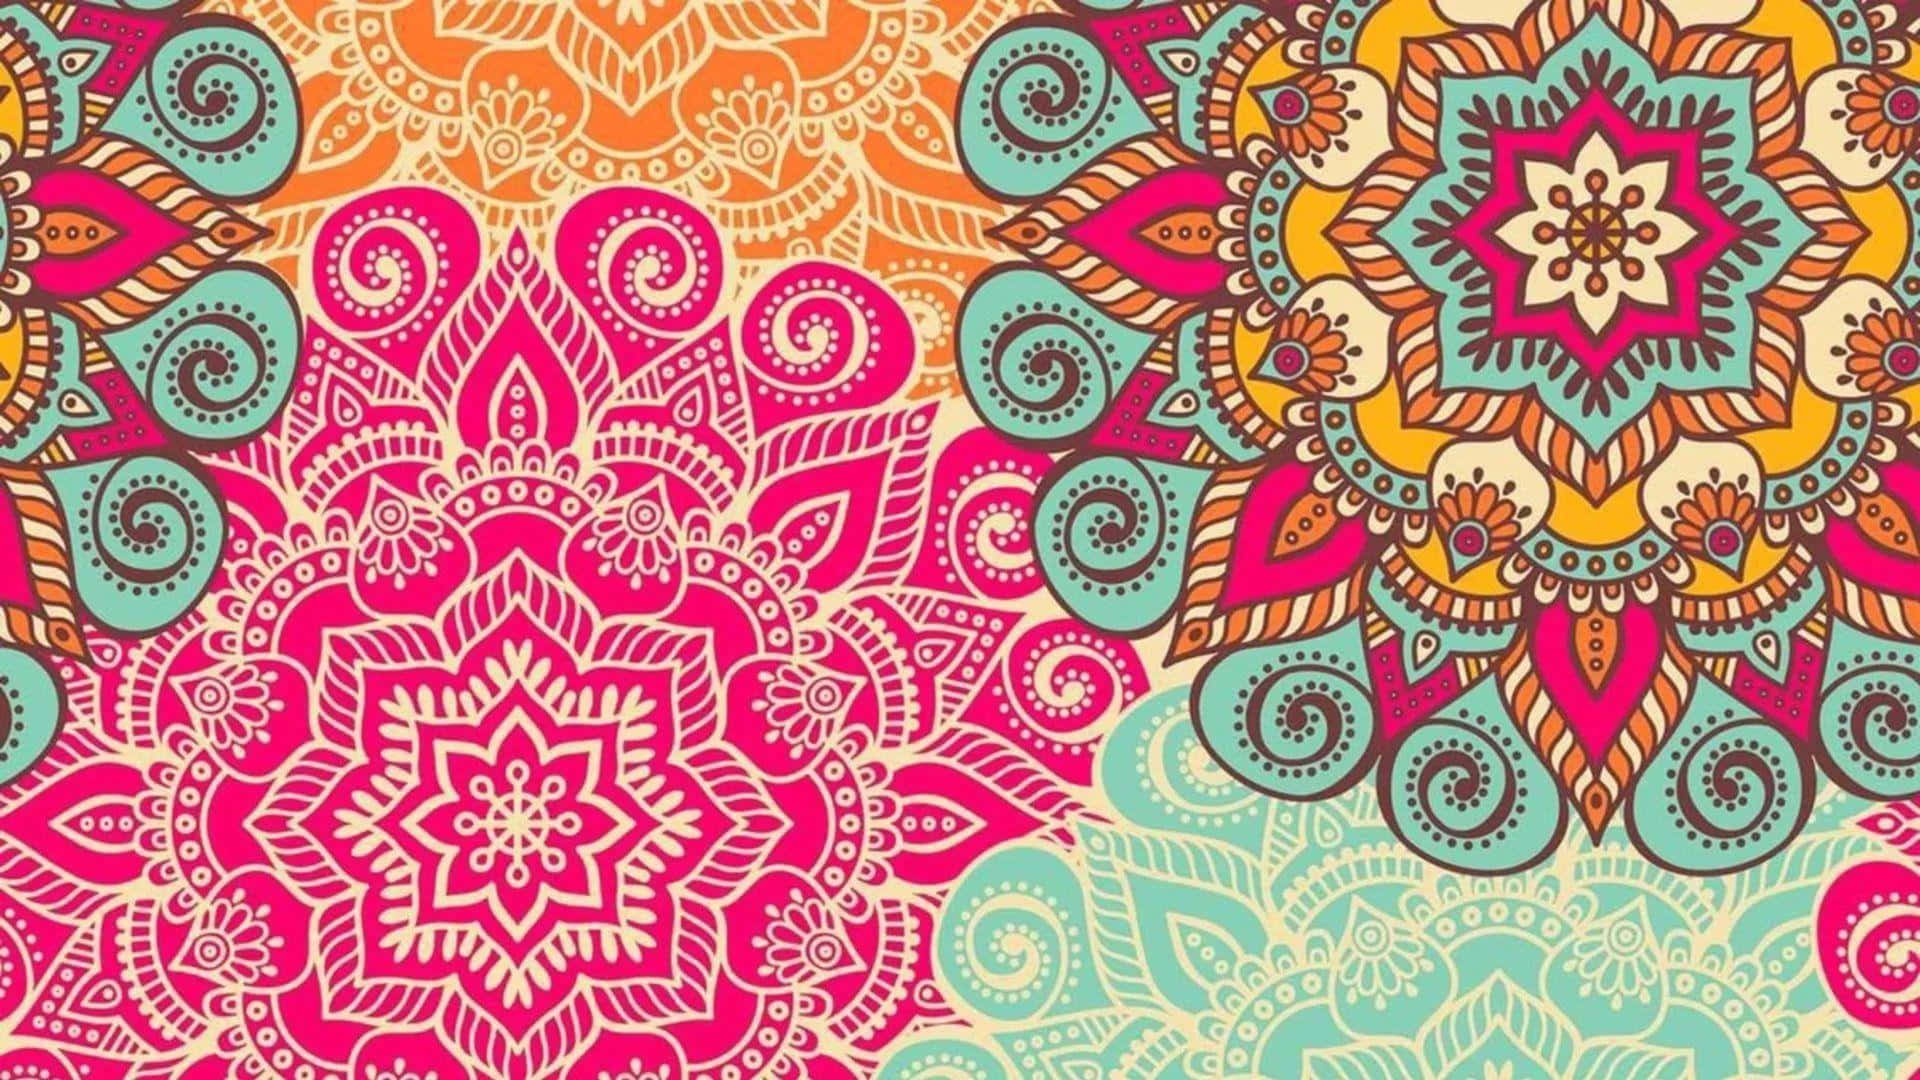 Get creative and stay productive on the go with the stylish Boho Laptop Wallpaper